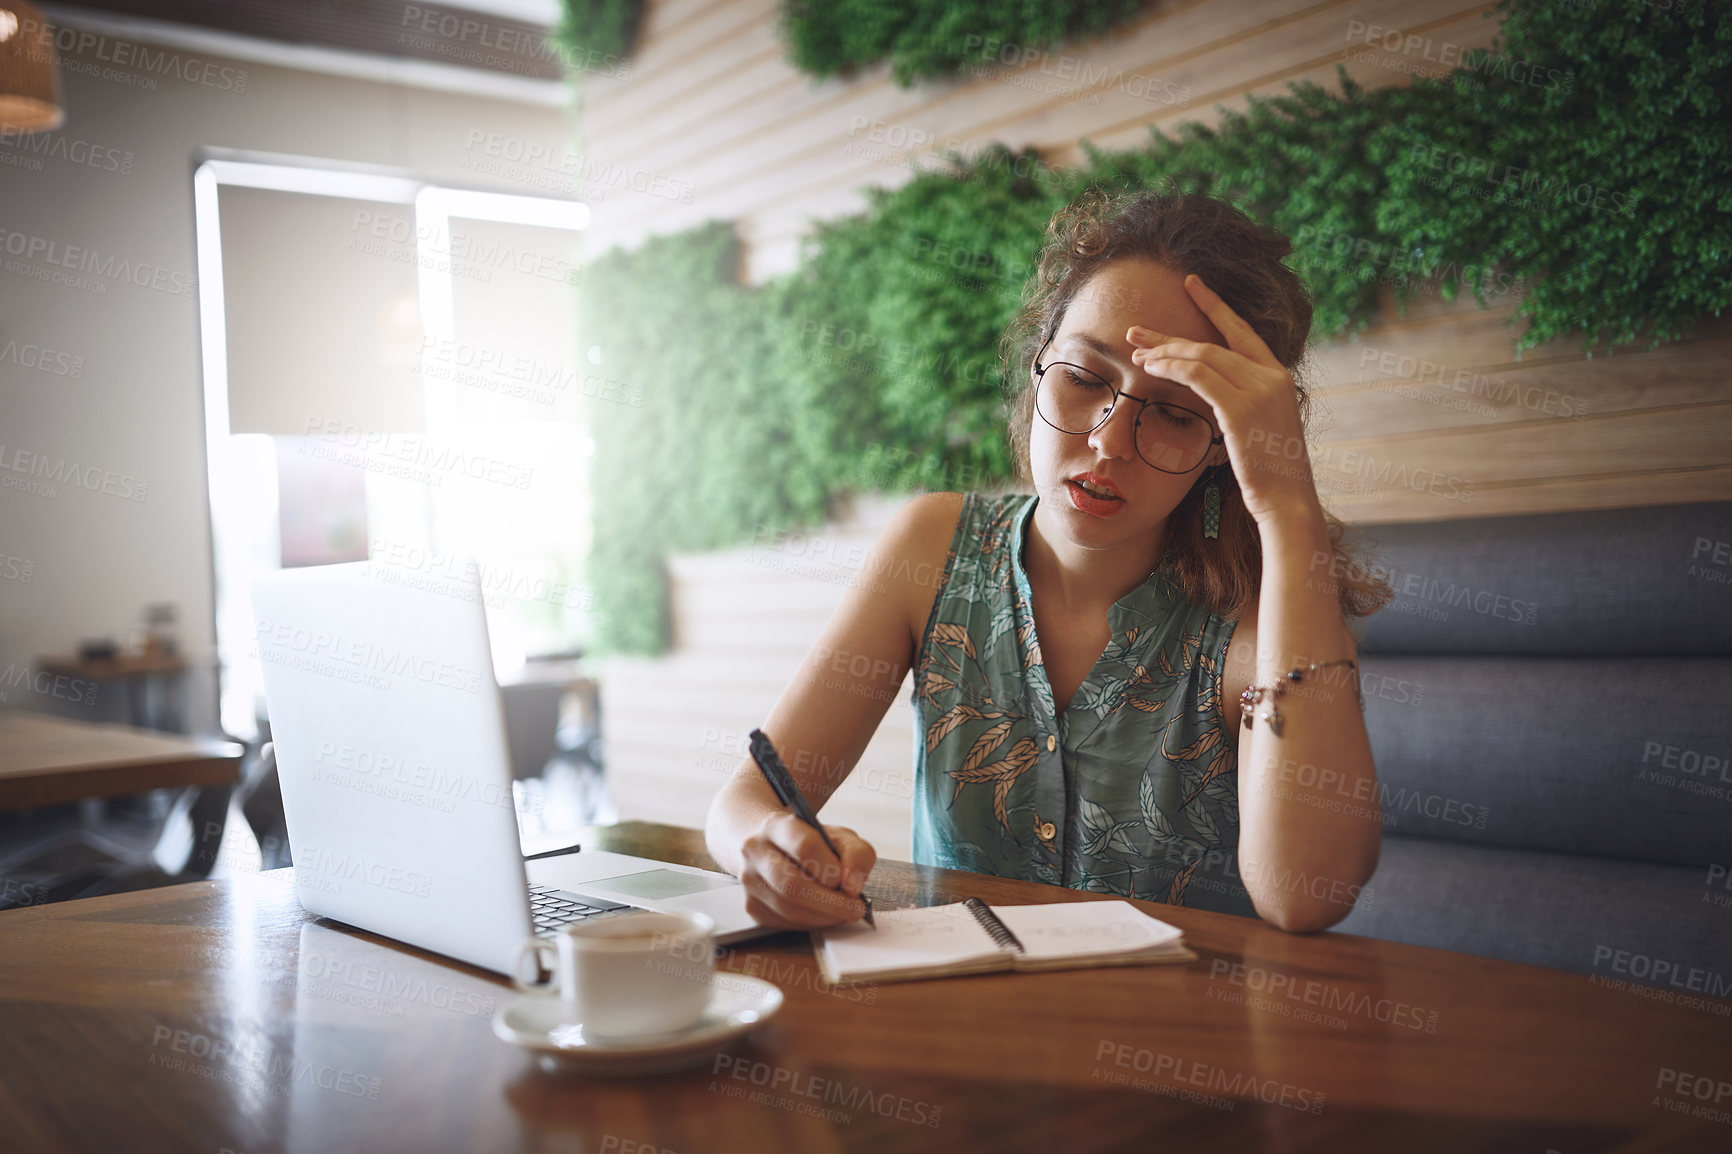 Buy stock photo Shot of a young woman looking stressed while working at a cafe